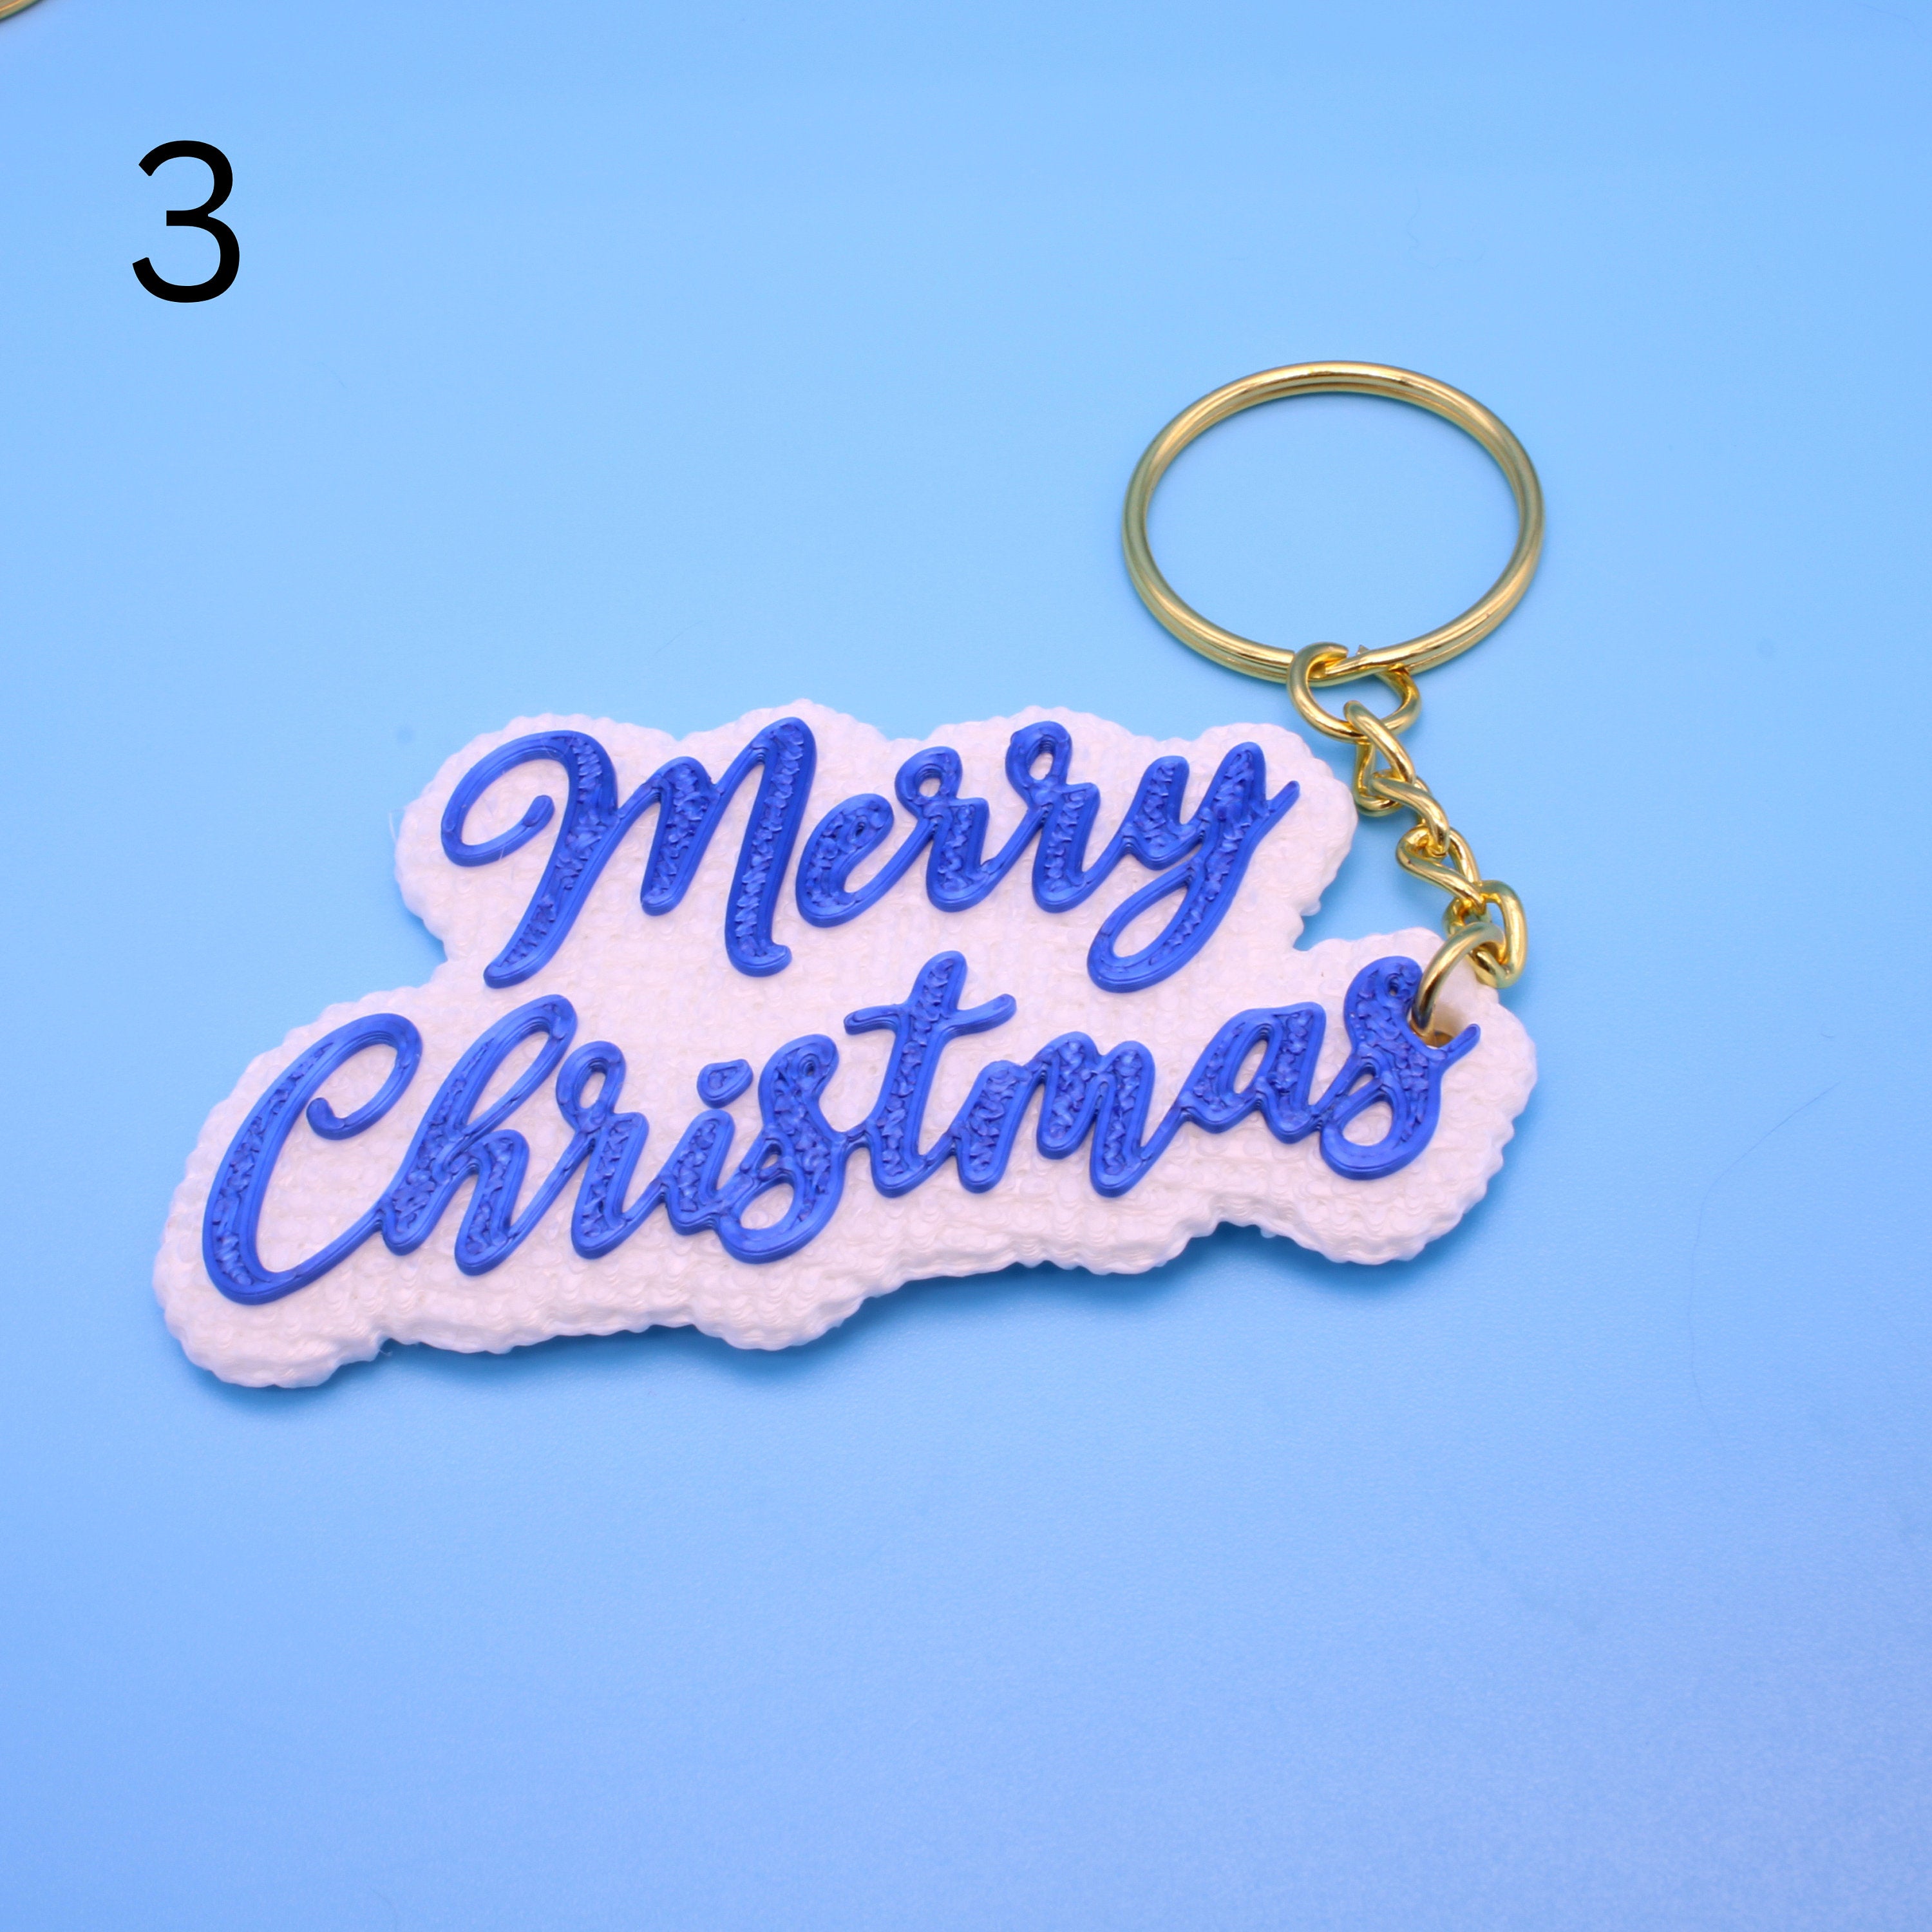 Merry Christmas Keychain- Many Colors